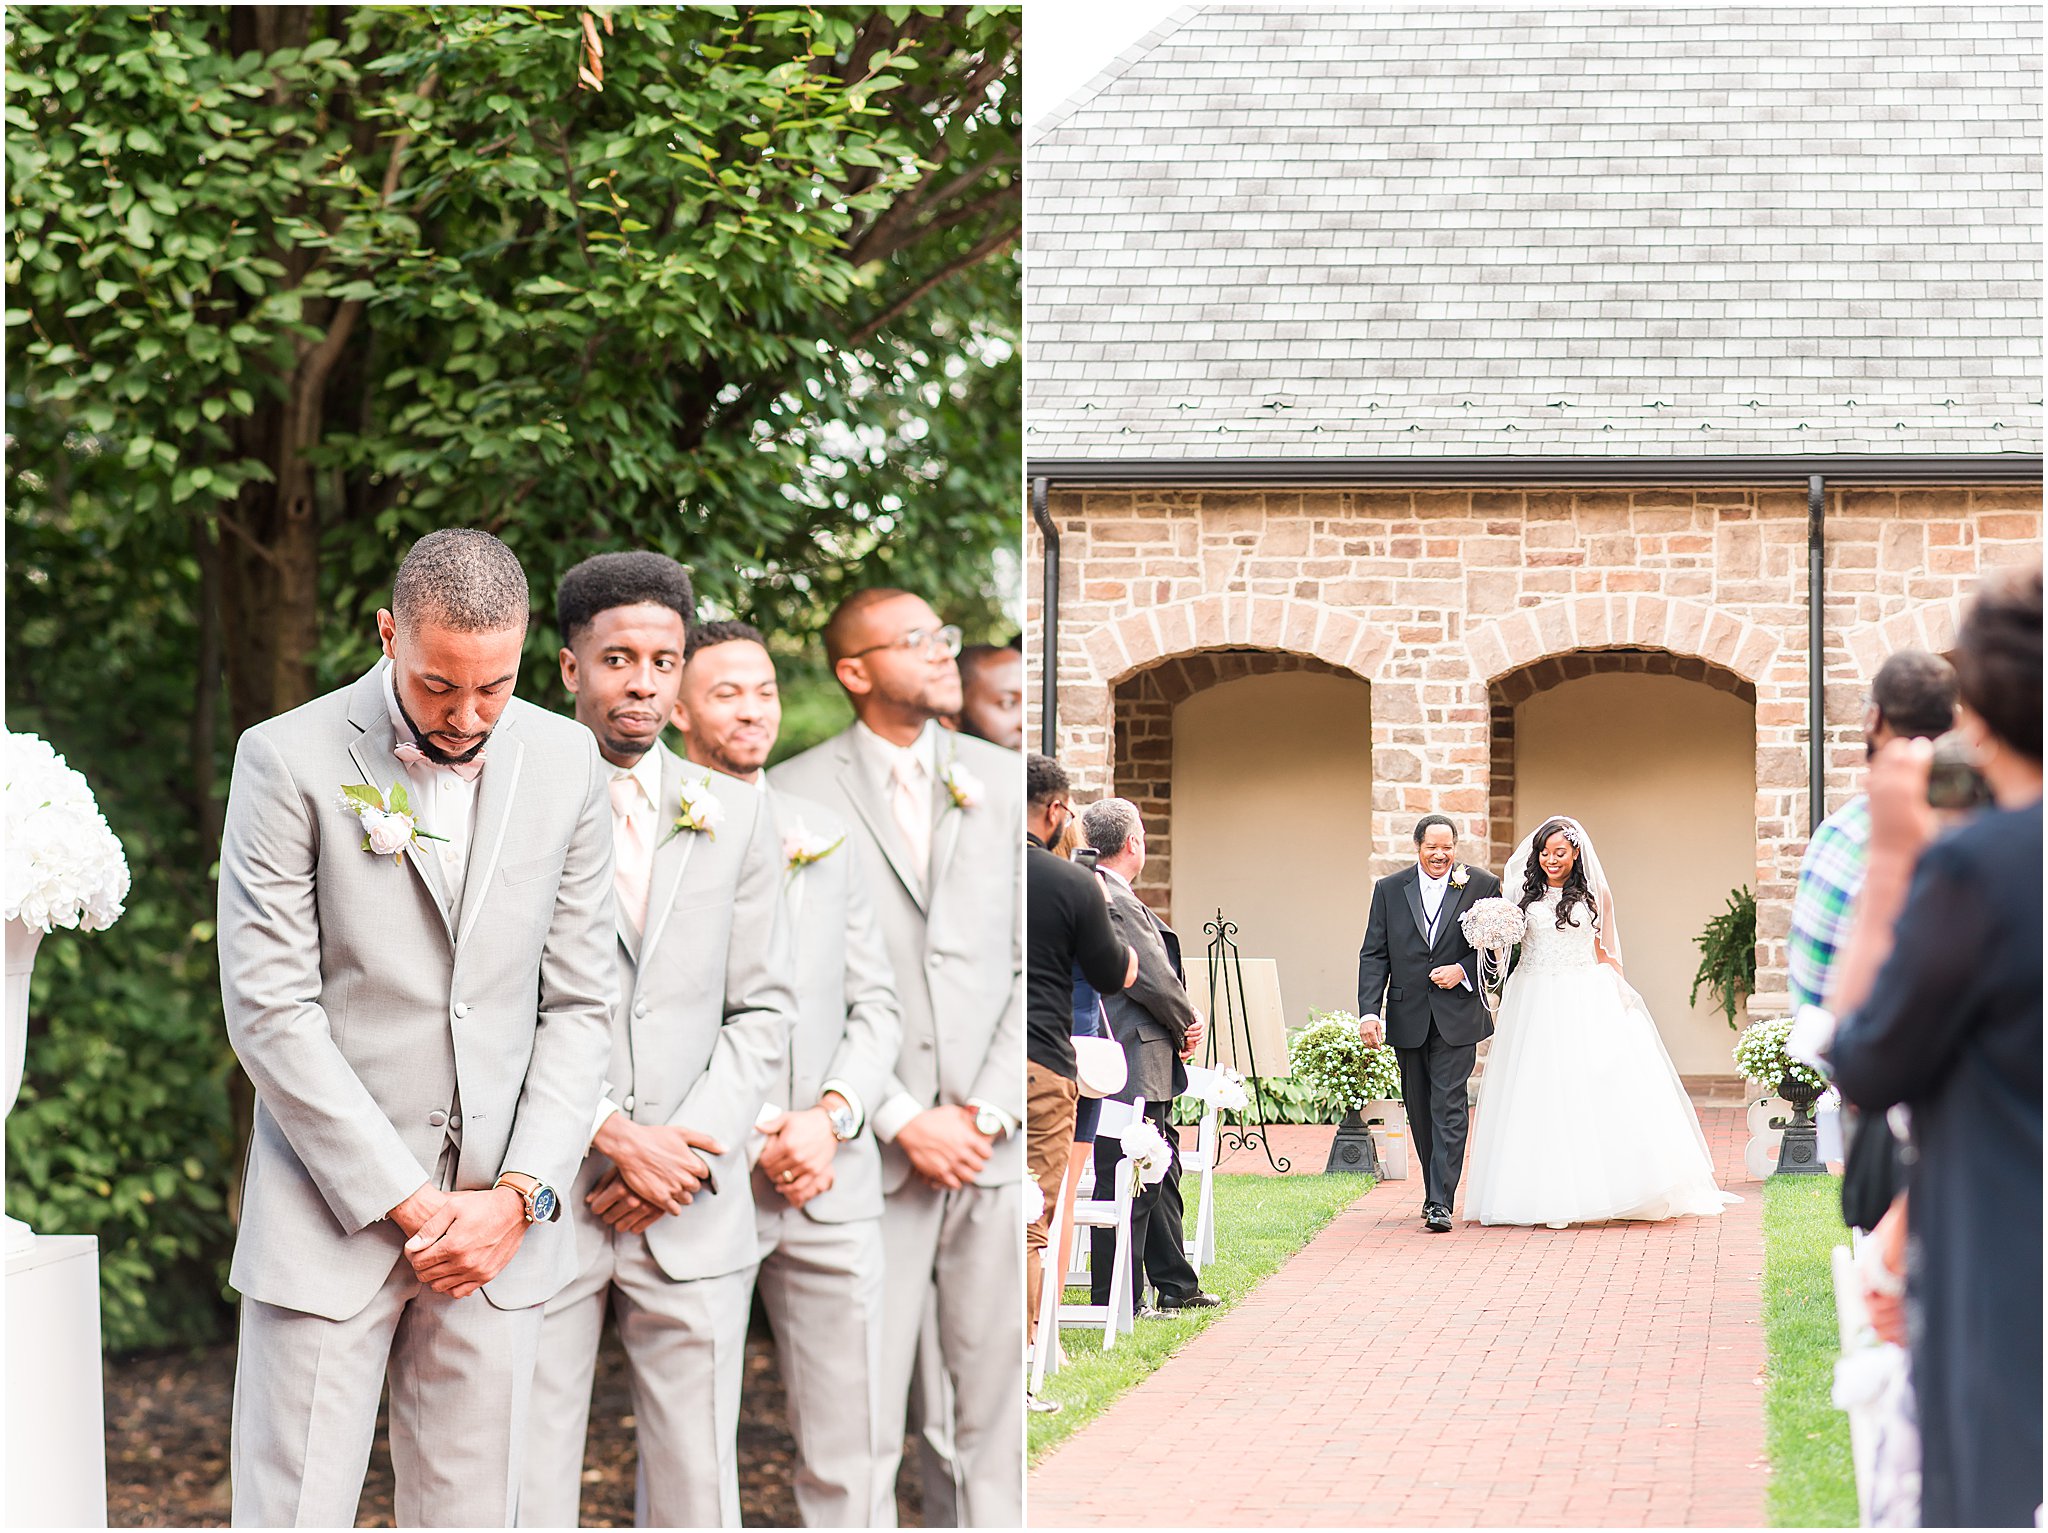 Bride walking down the aisle during outdoor ceremony at Pinnacle Golf Club | Courtney Carney Photography